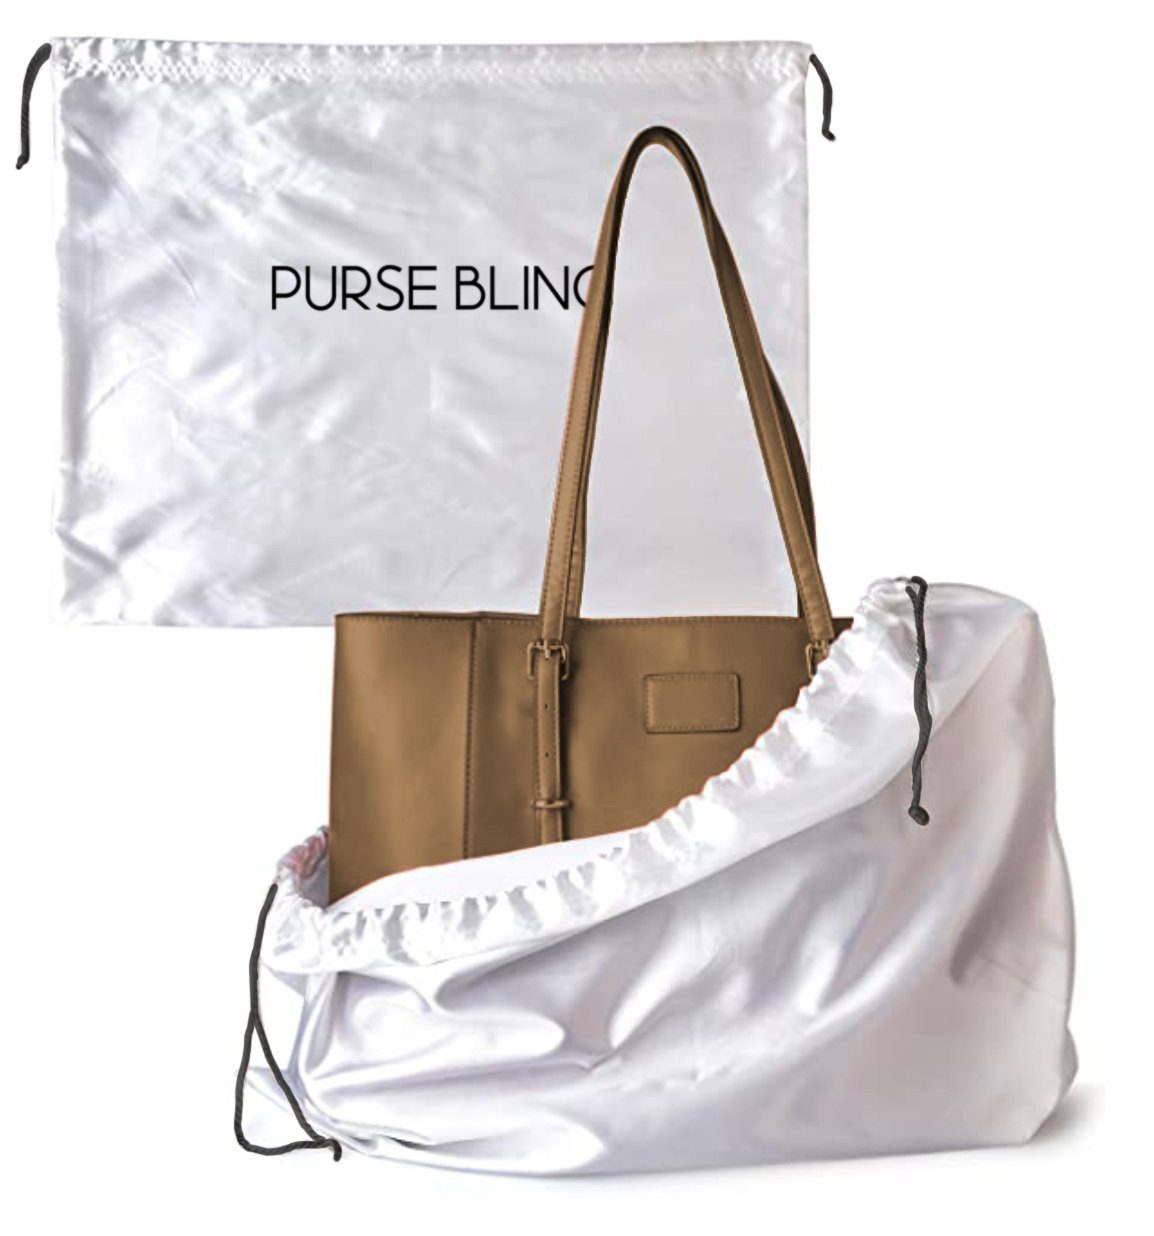 dust cover bags for handbags